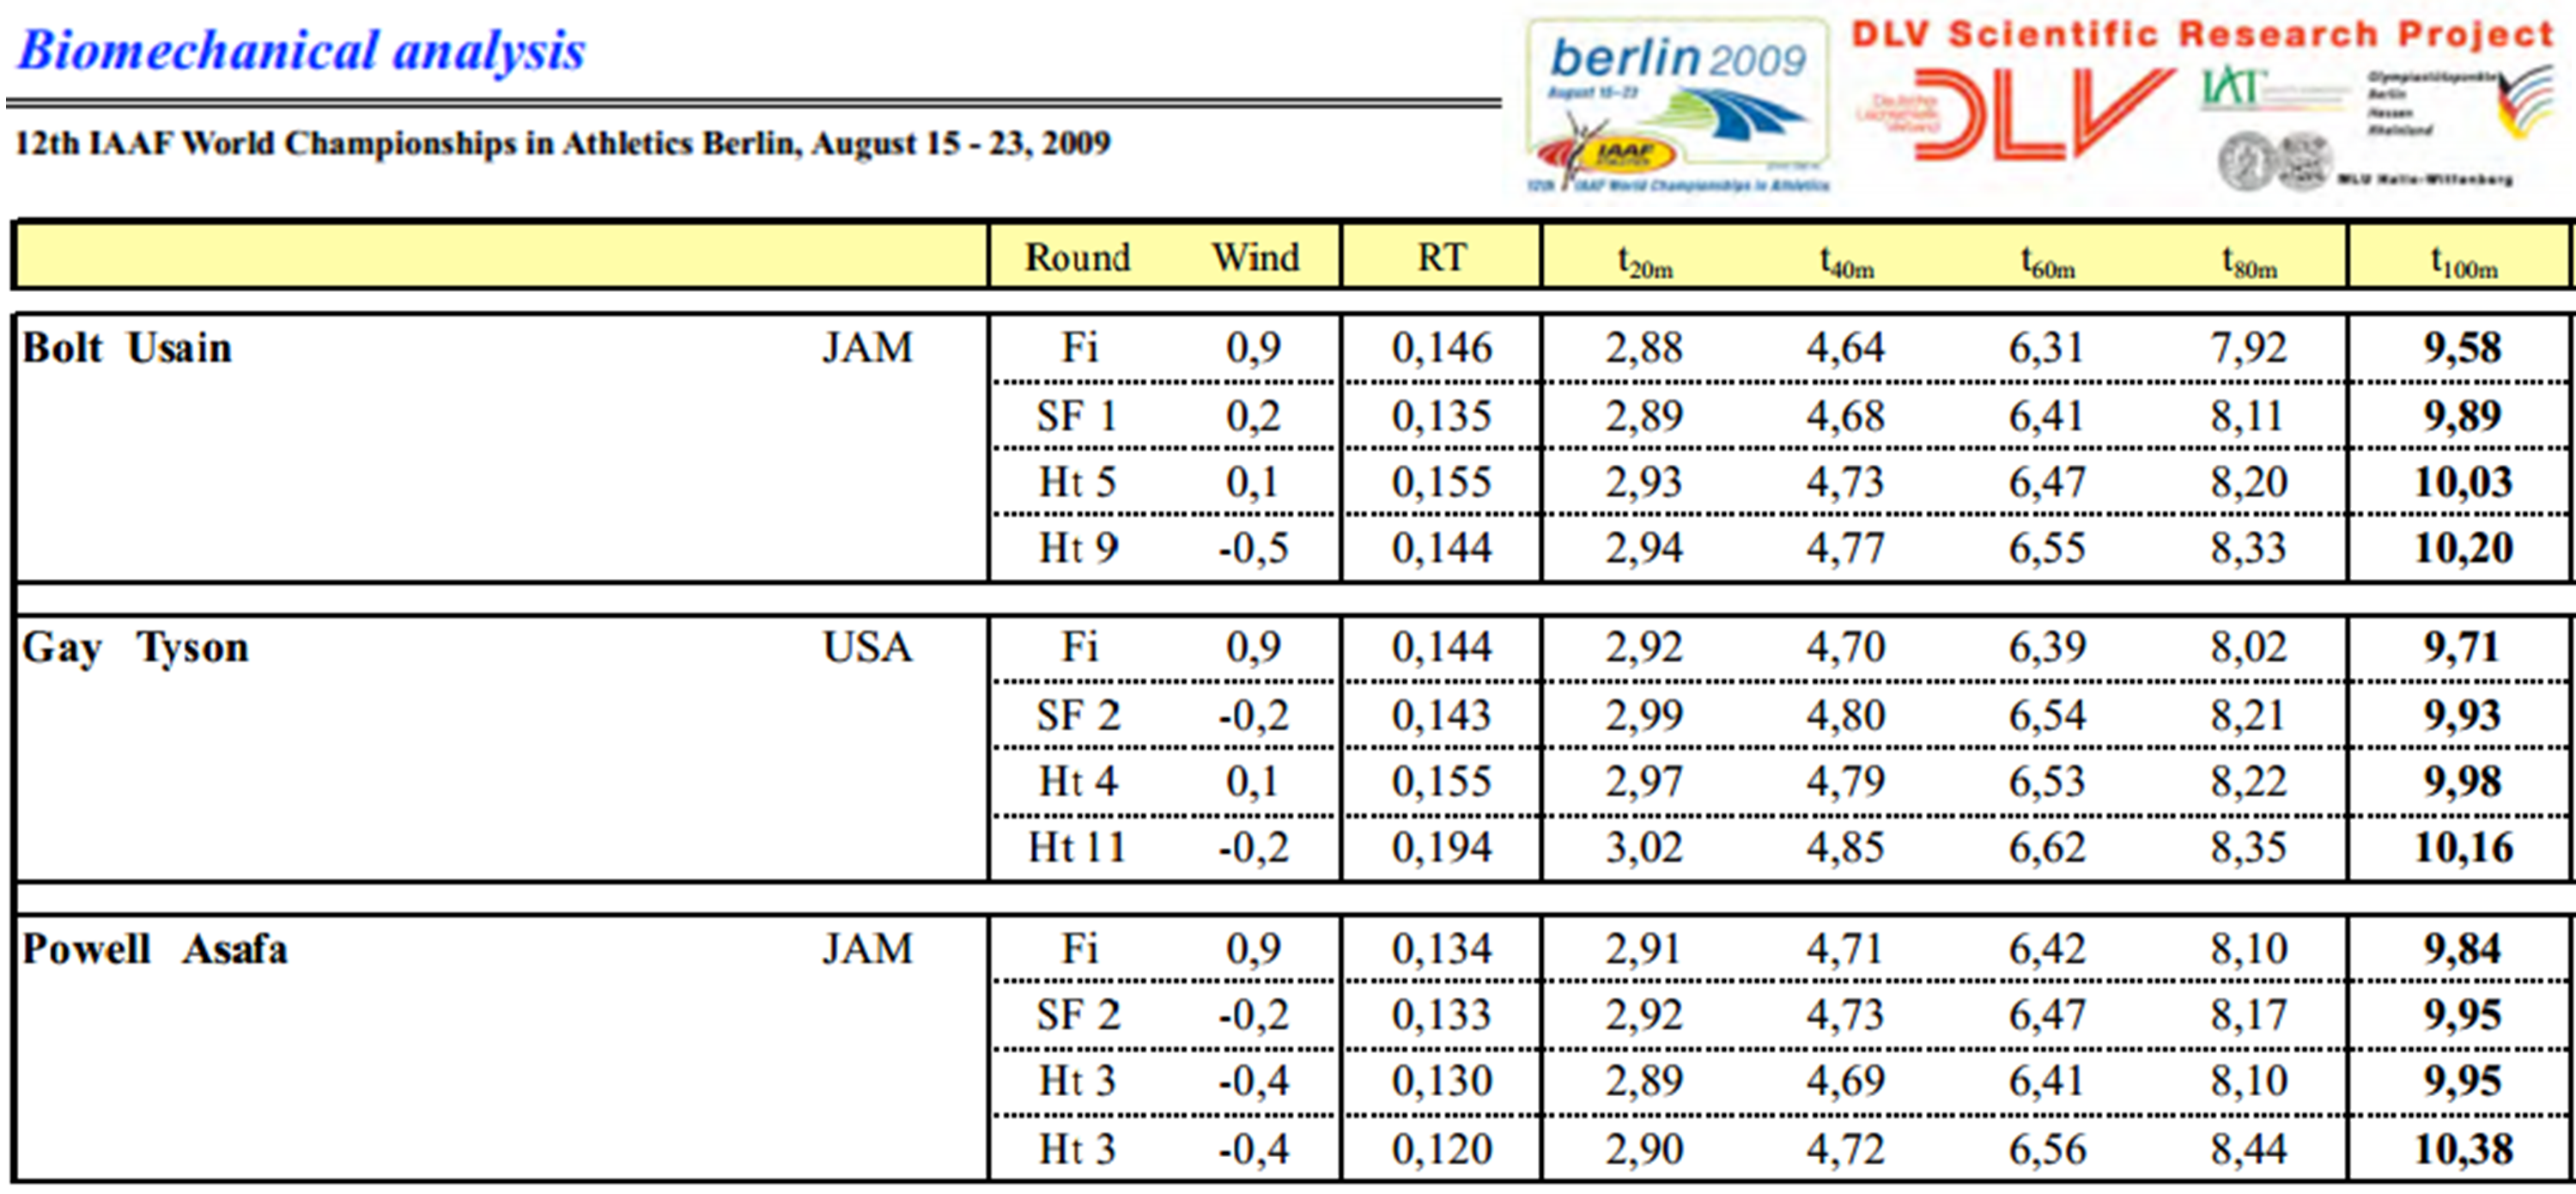 partial times of the 100m-race at Berlin 2009